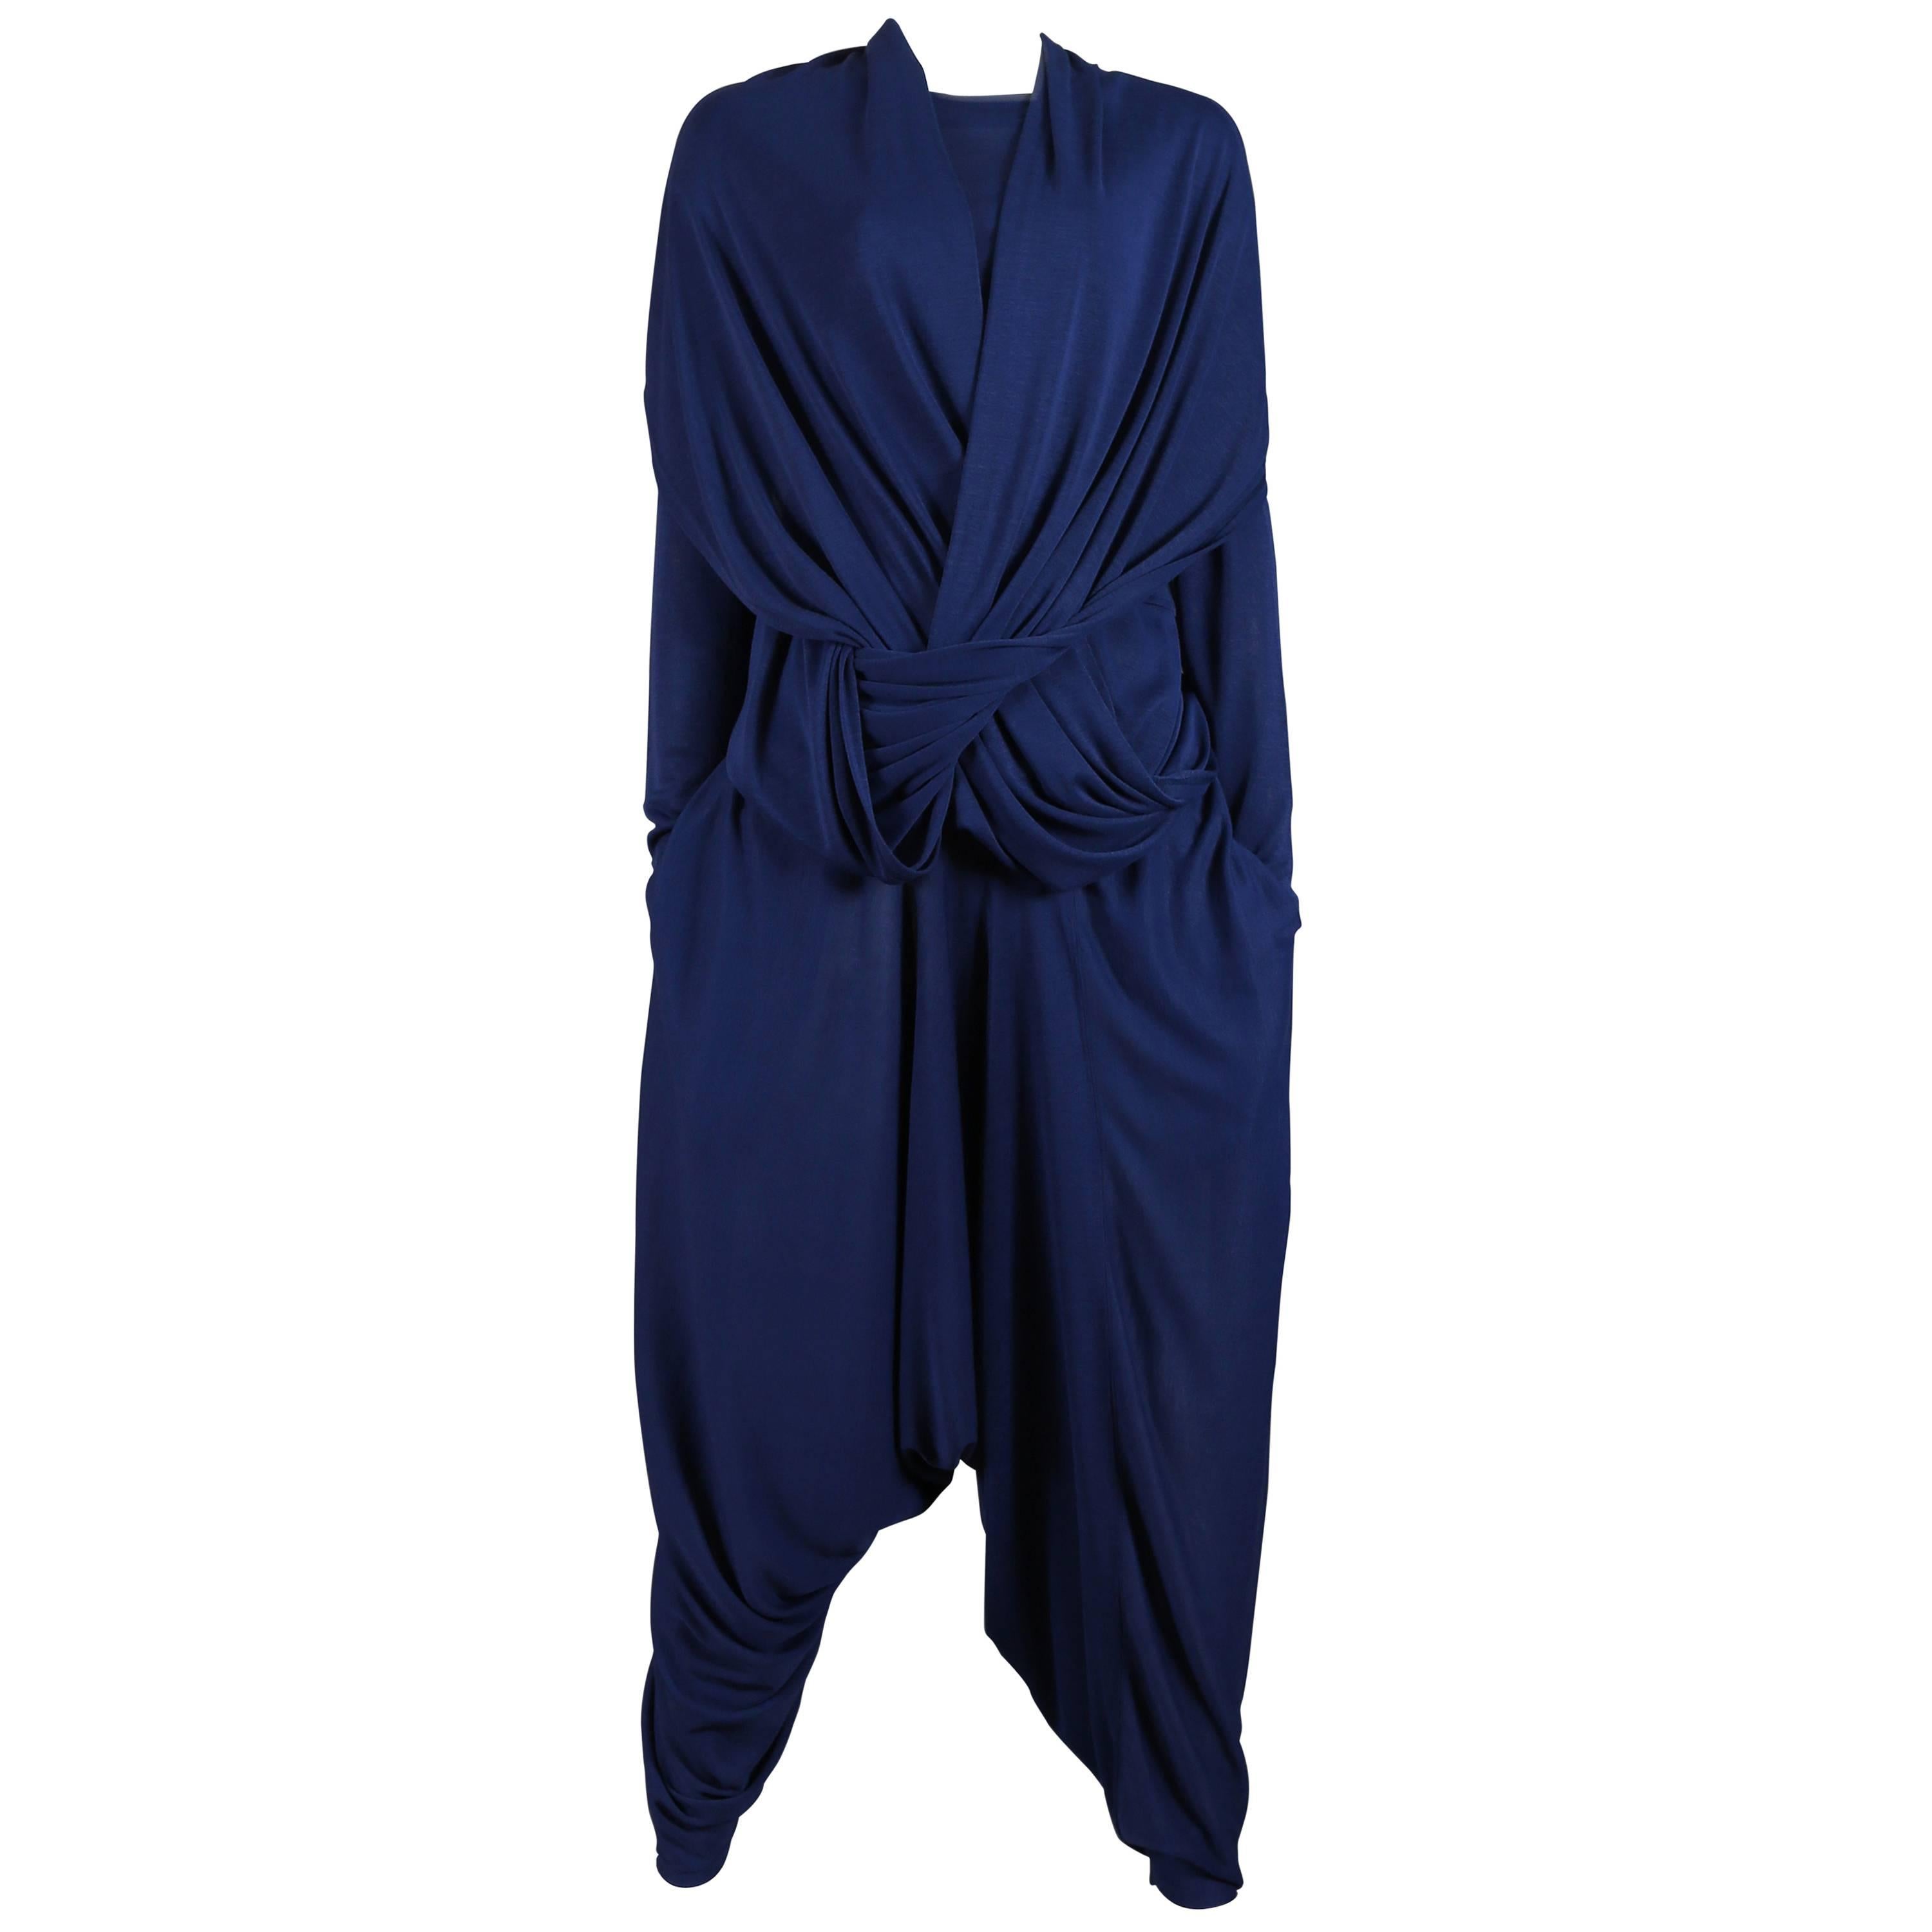 Issey Miyake knitted 2 piece pant suit, circa 1980s